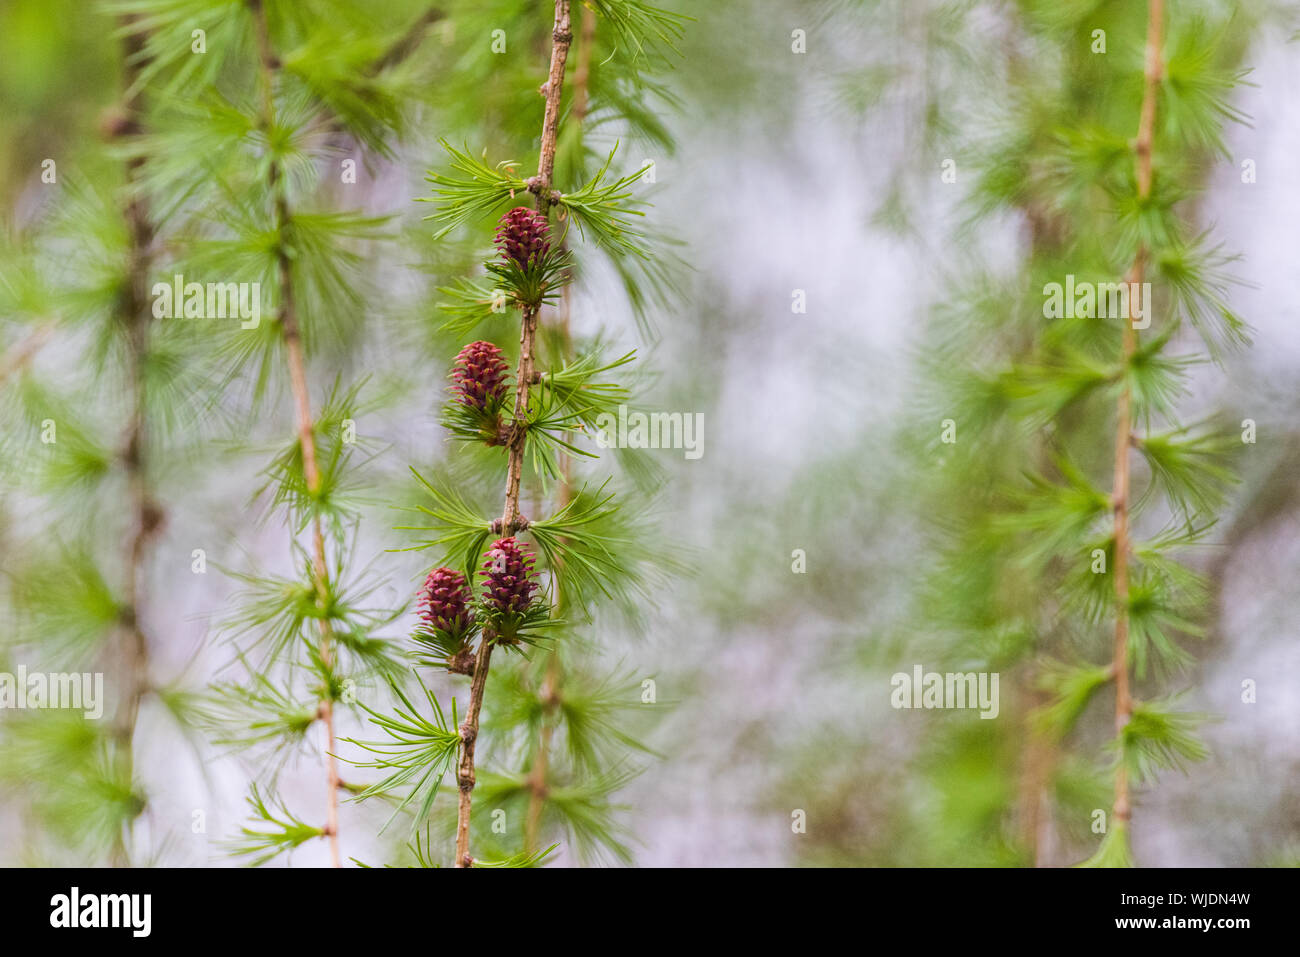 New conifer shoots, blurred background. Artistic, space for text. Abstract feel. Stock Photo